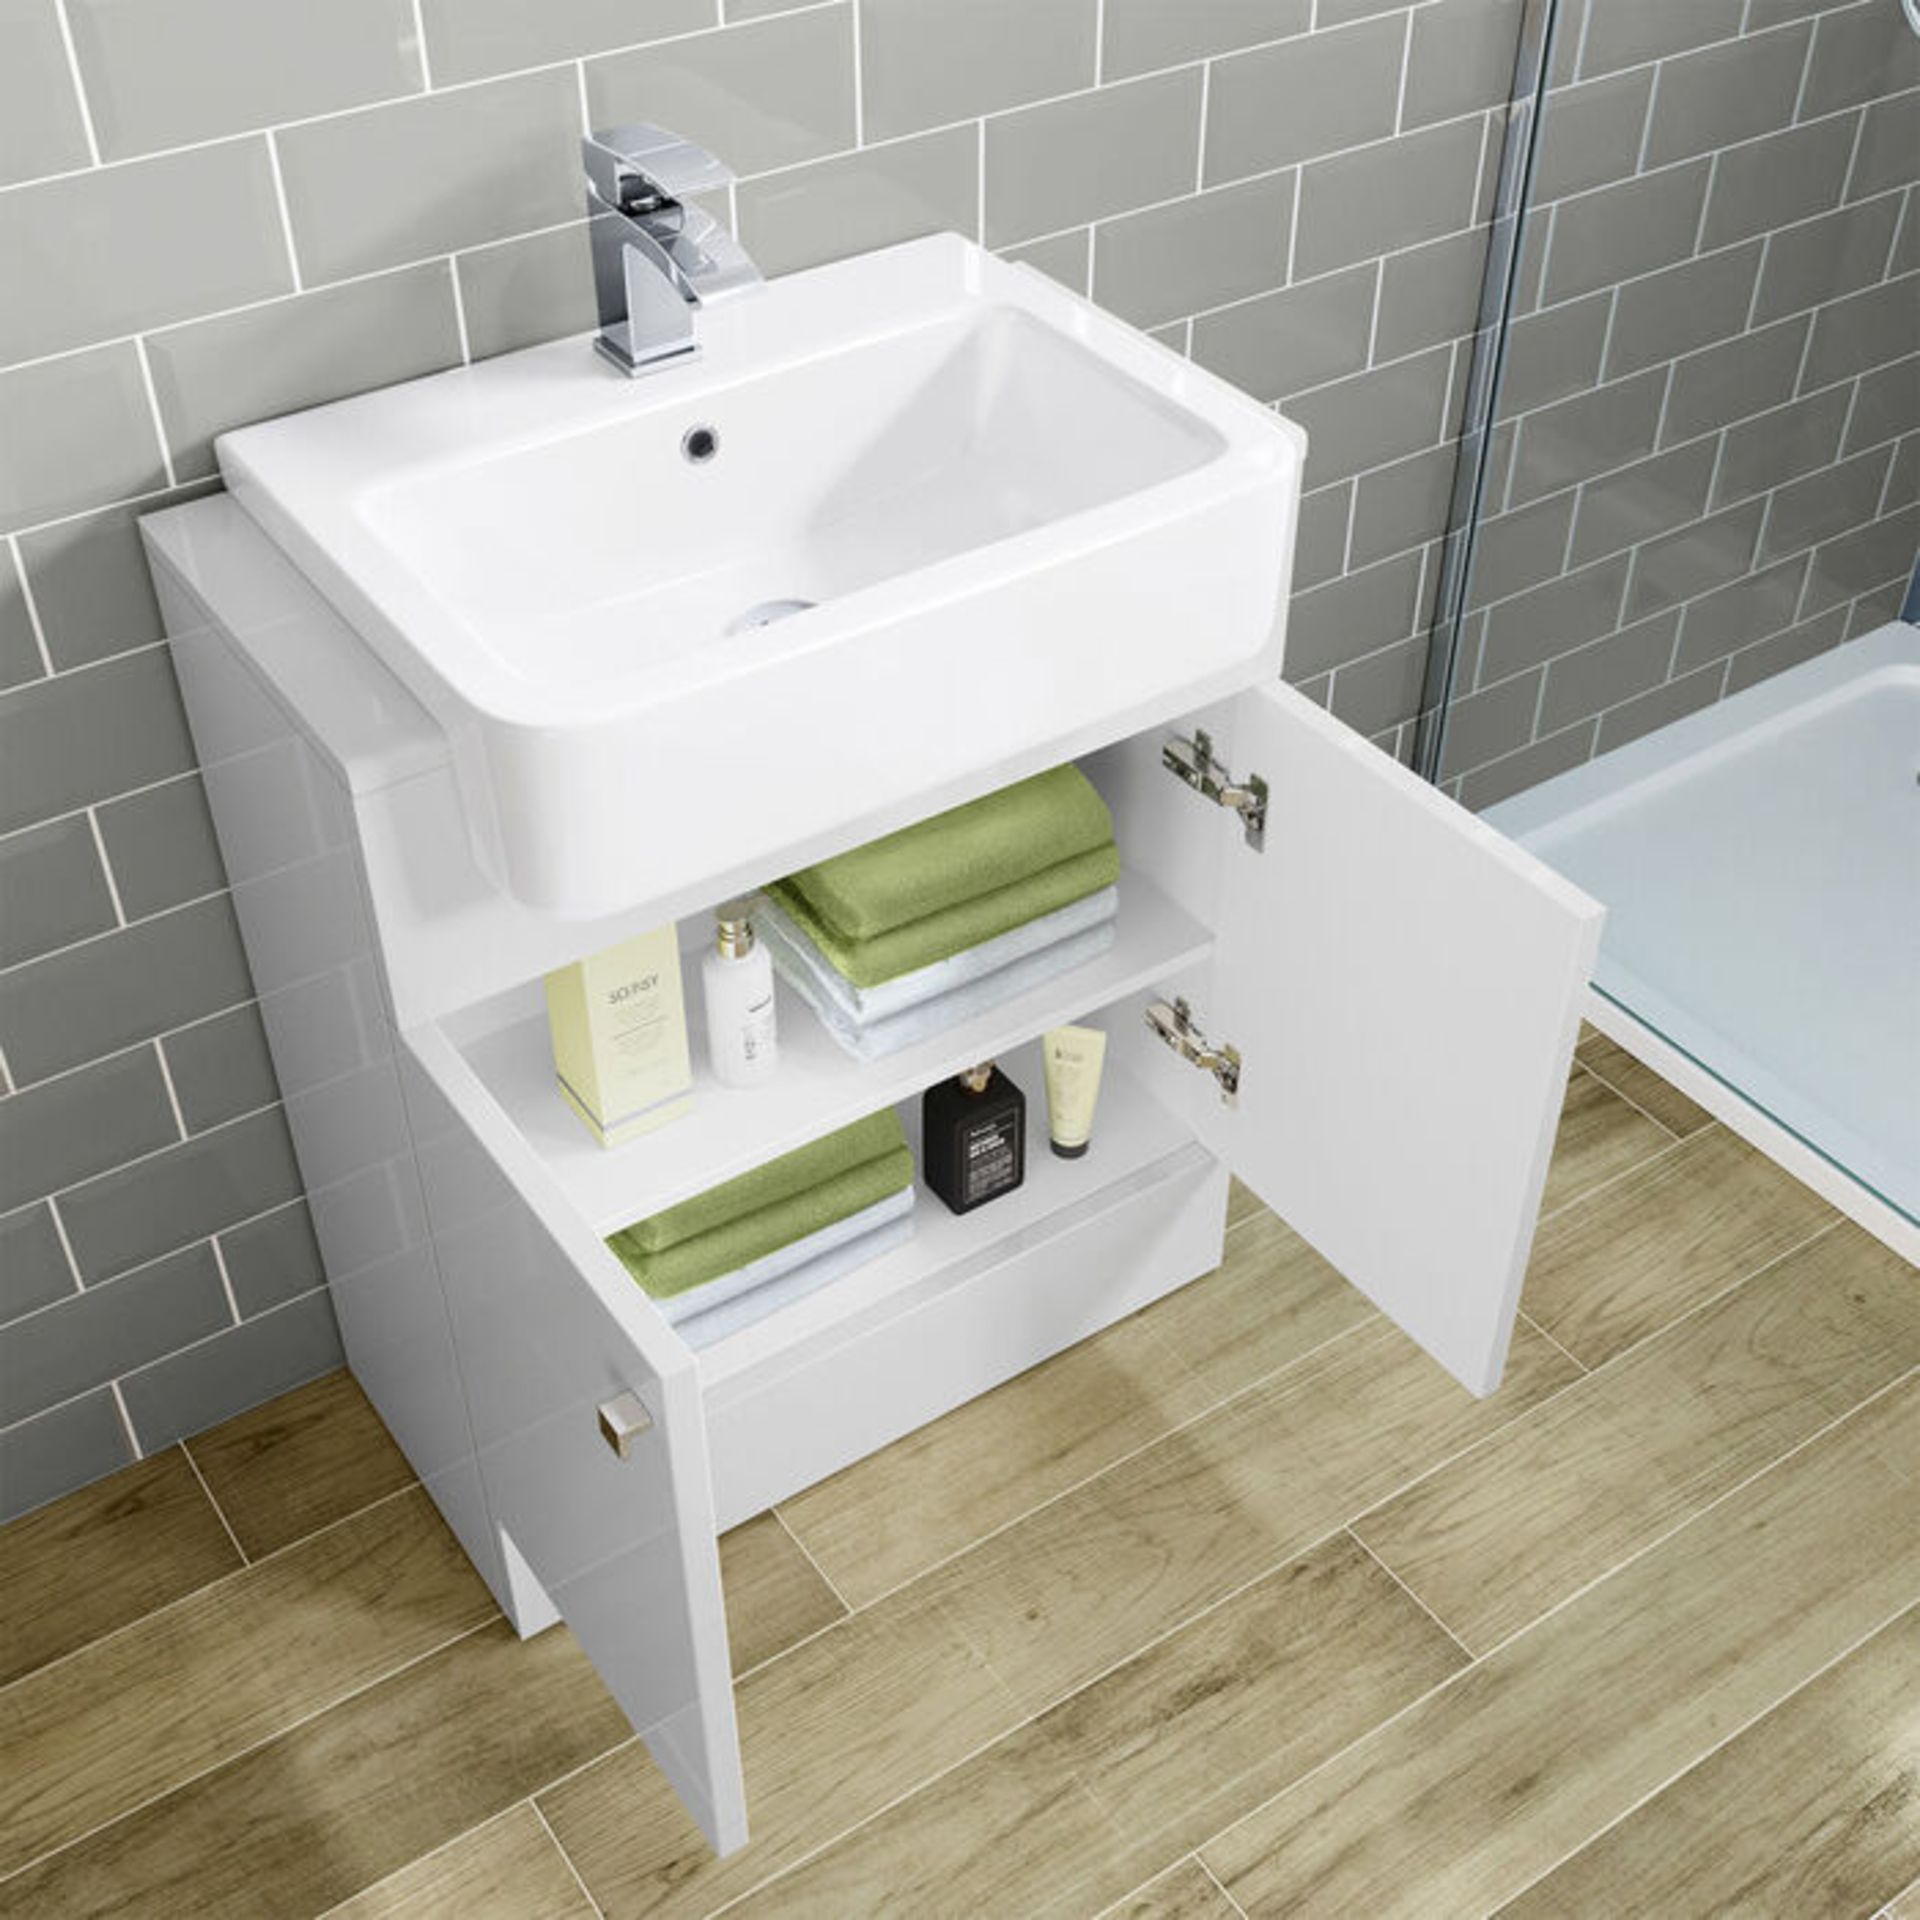 (AA28) 660mm Dayton Gloss White Sink Vanity Unit - Floor Standing. RRP £574.99. Comes complete... - Image 2 of 3